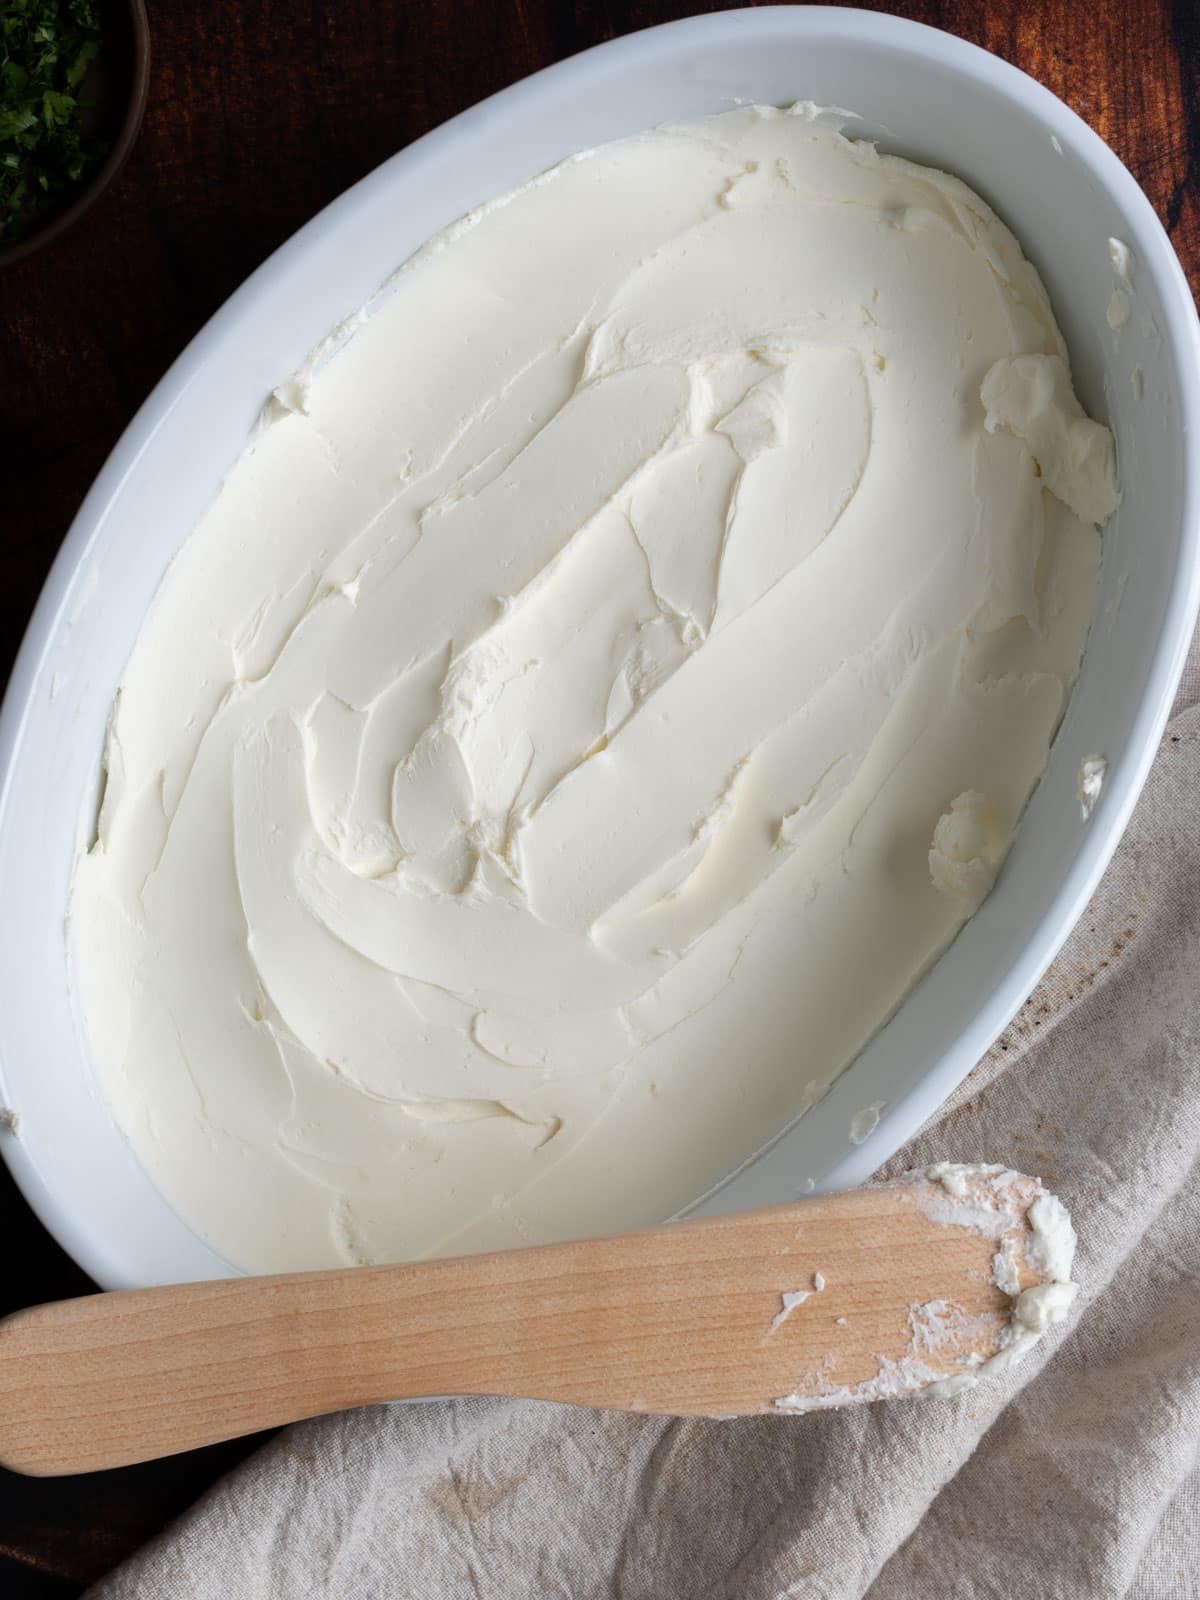 Cream cheese spread evenly at the bottom of a dish.